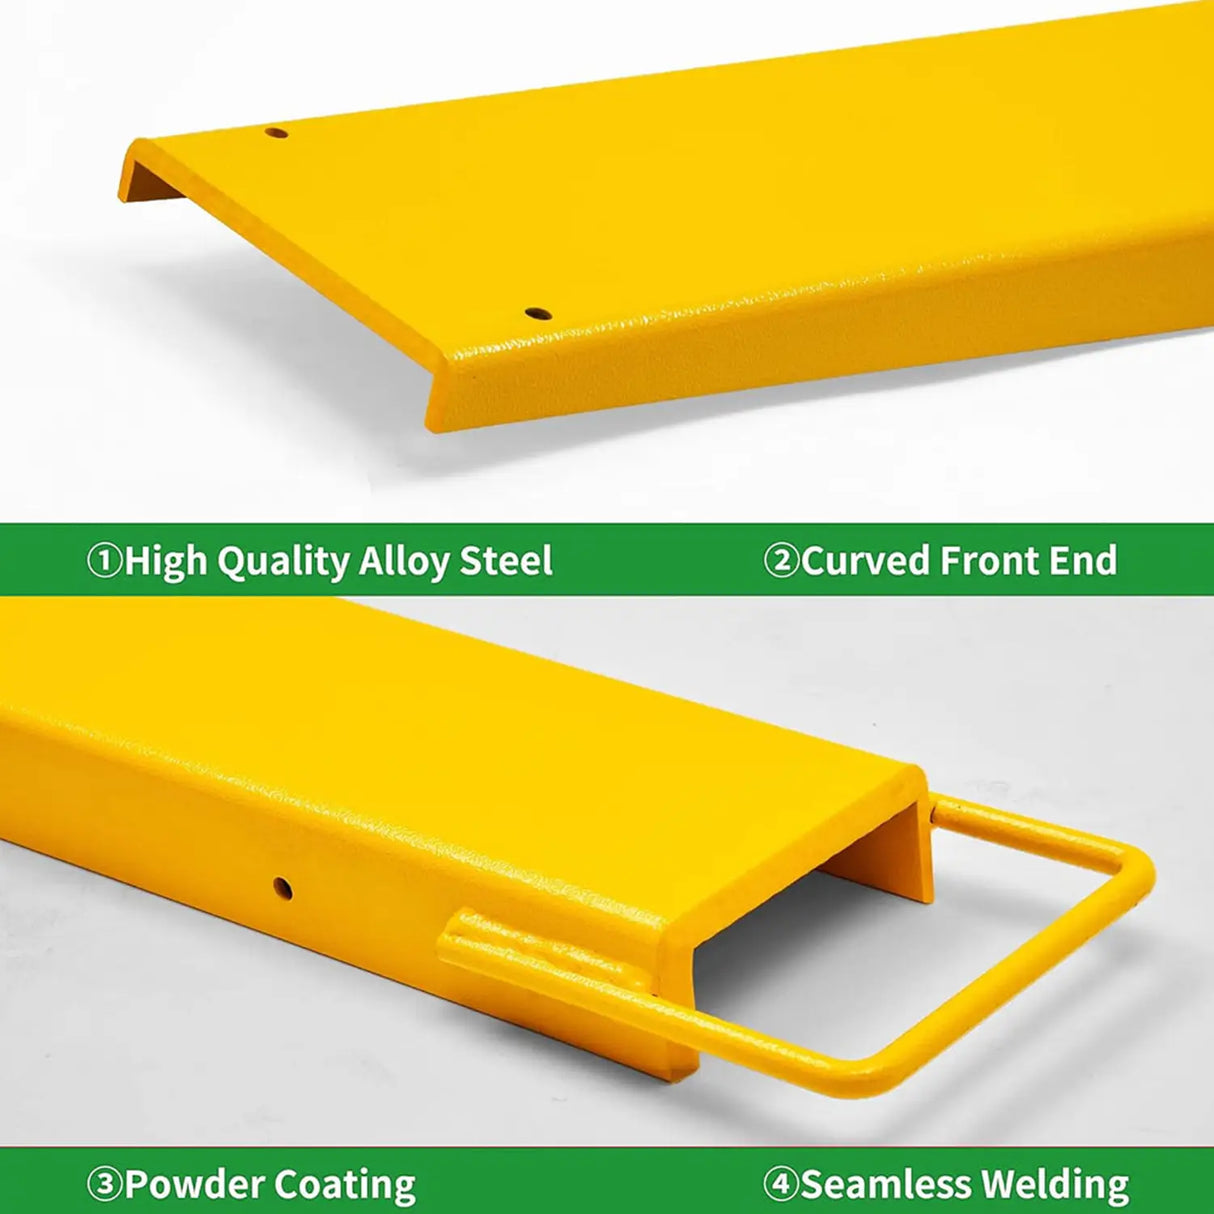 Pallet Fork Extension 60 Inch Length 4.5 Inch Width, Heavy Duty Steel Pallet Extensions for Forklift Truck, Yellow